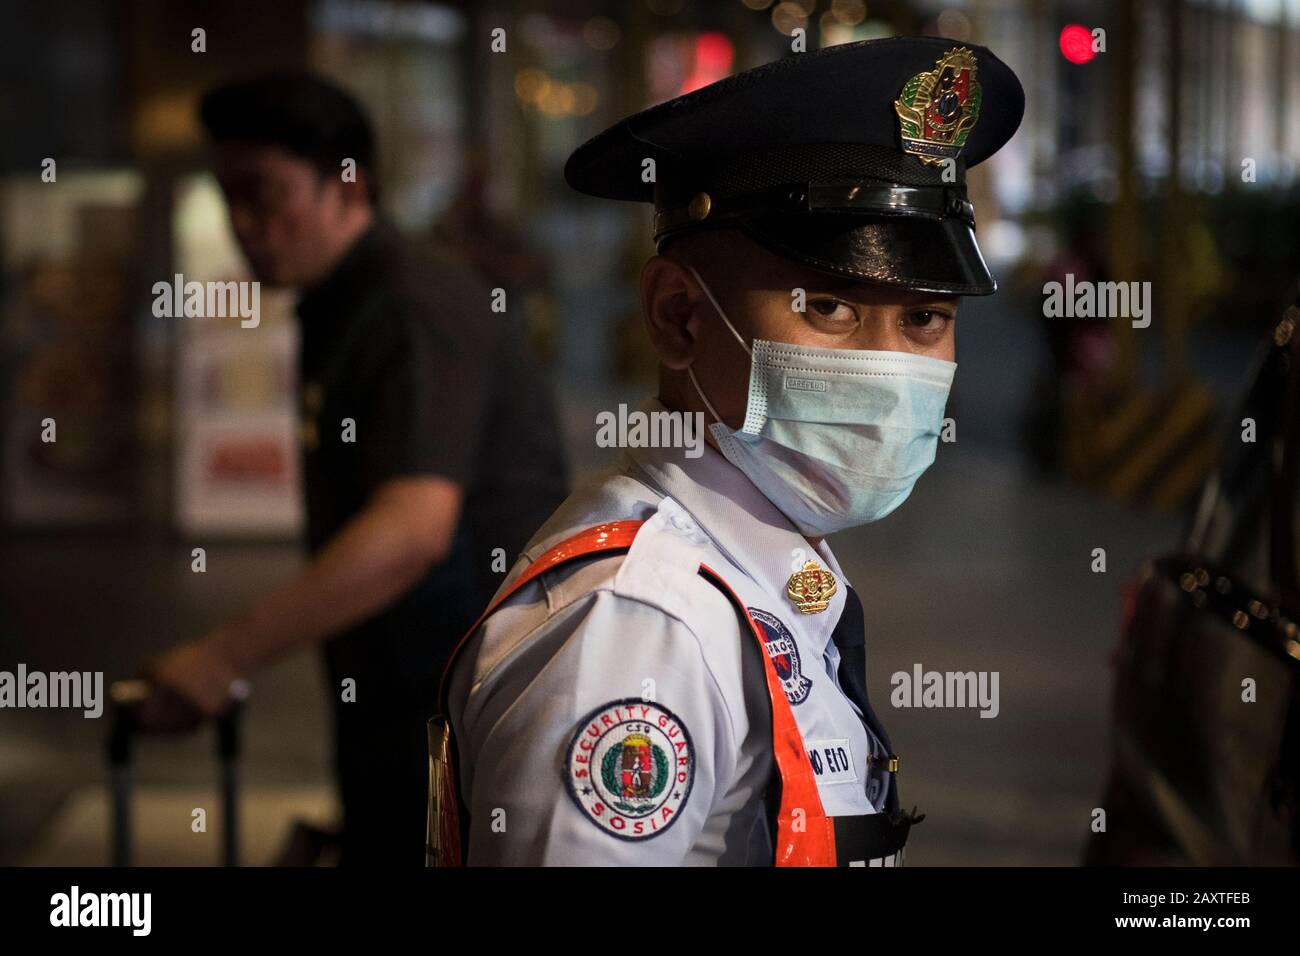 Manila, Philippines. 08th Feb, 2020. A security guard wears a face mask as a precaution to the outbreak of the coronavirus. Filipinos remain anxious over a new coronavirus known as Covid-19 which originated in Wuhan, China in December 2019. The Philippines' Department of Health announced the country's first death due to the virus on 2 February - the first reported death outside of China. The number of 2019-nCoV cases worldwide has already surpassed that of the 2003 Sars epidemic, with the death toll now over 1300. Credit: SOPA Images Limited/Alamy Live News Stock Photo